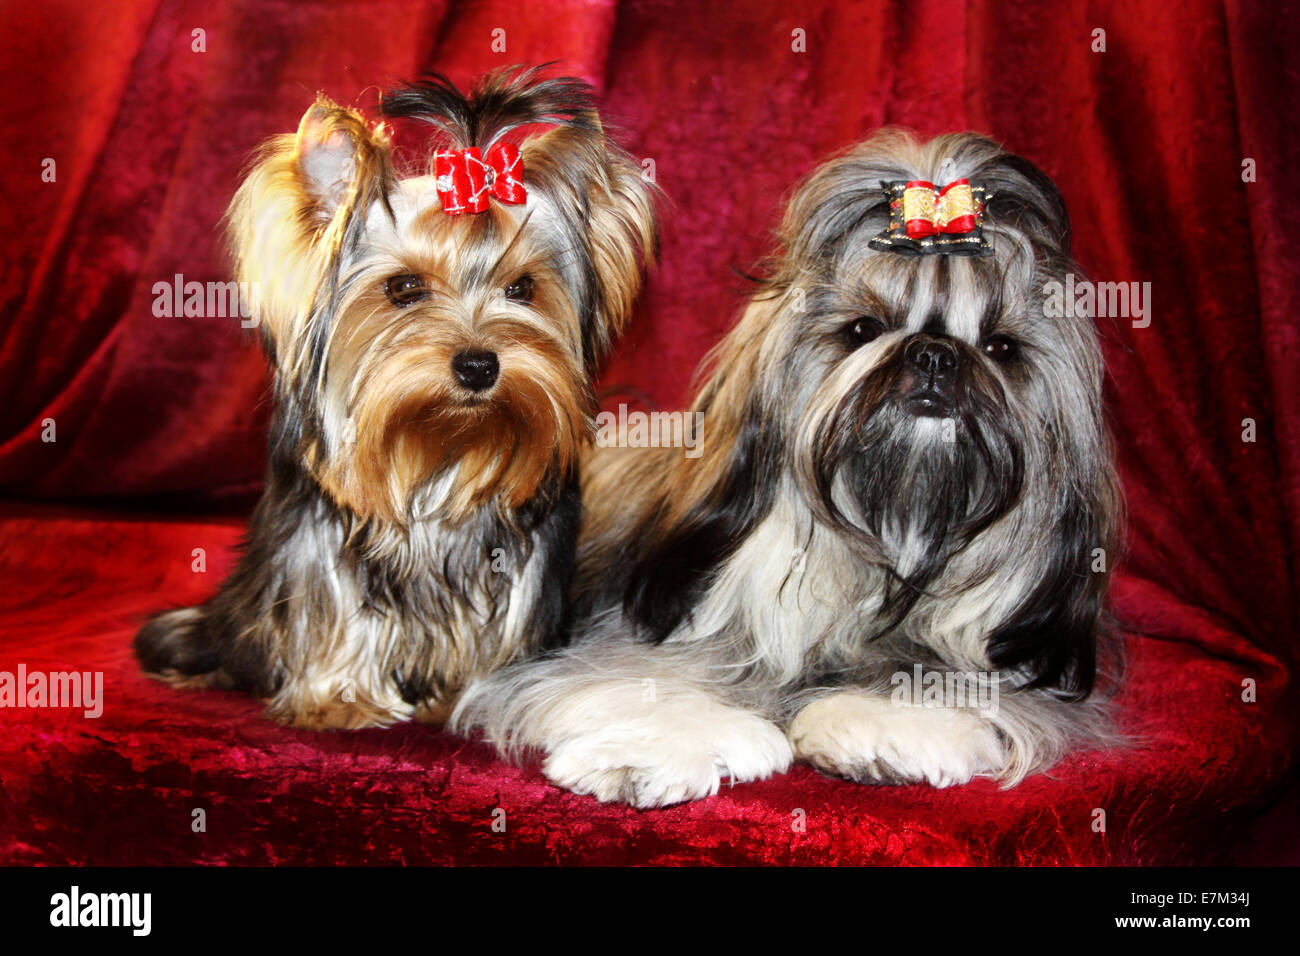 Two doggies.Two small doggies with long wool on a red background. Stock Photo